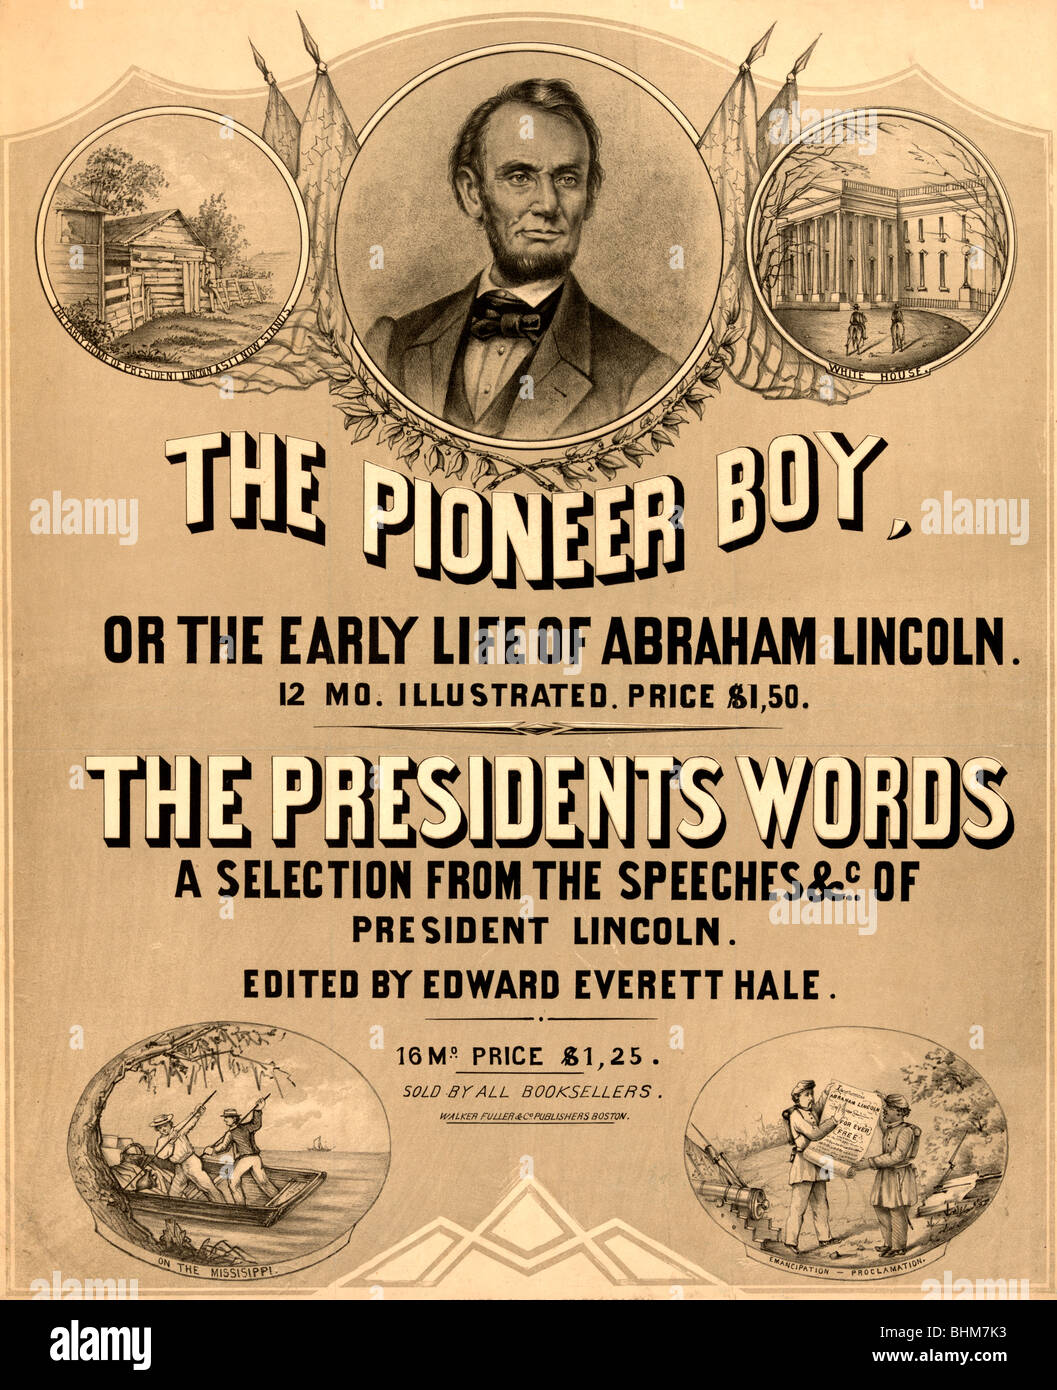 The pioneer boy, or the early life of Abraham Lincoln. Advertisement for two books about Abraham Lincoln Stock Photo